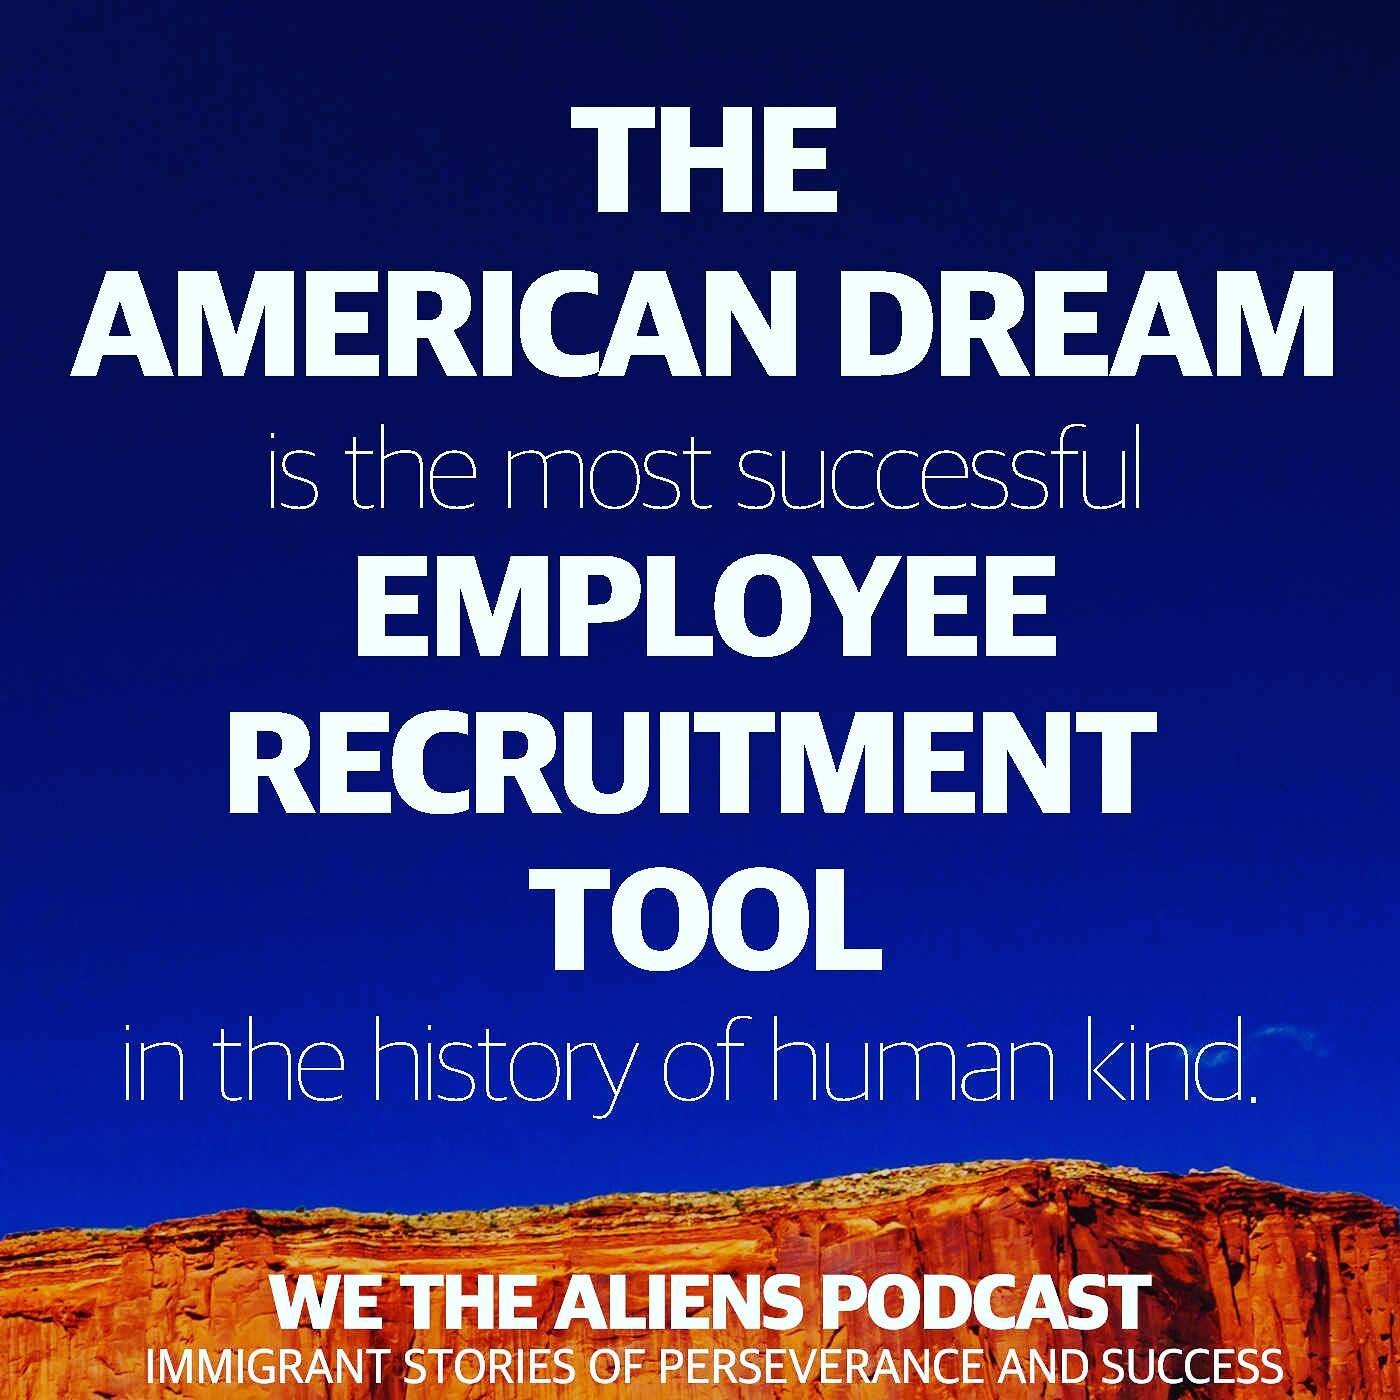 DID YOU BUY IN?
.
Share your story with us in our Clubhouse rooms on Tuesday and Thursday.
.
👉linktree in the bio👈
🎙We The Aliens Podcast🎙
@wethealienspod!
.
.
.
#WeTheAliens
.
.
.
#h1b #h1bvisa #f1visa #studentvisa #workvisa #businessvisa #o1vis